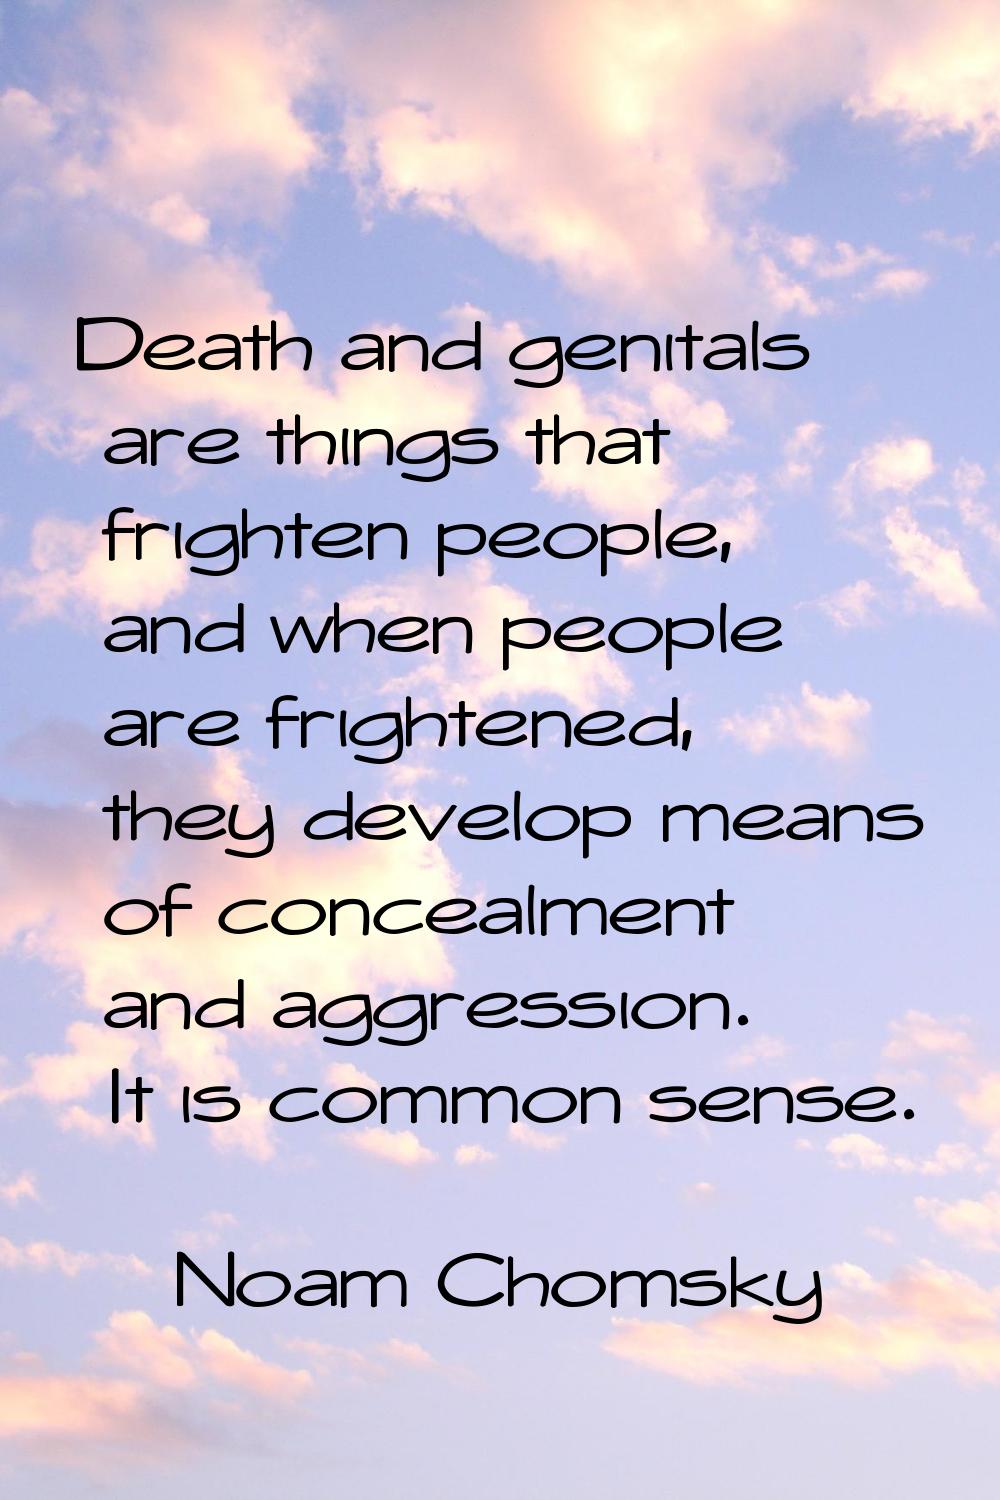 Death and genitals are things that frighten people, and when people are frightened, they develop me